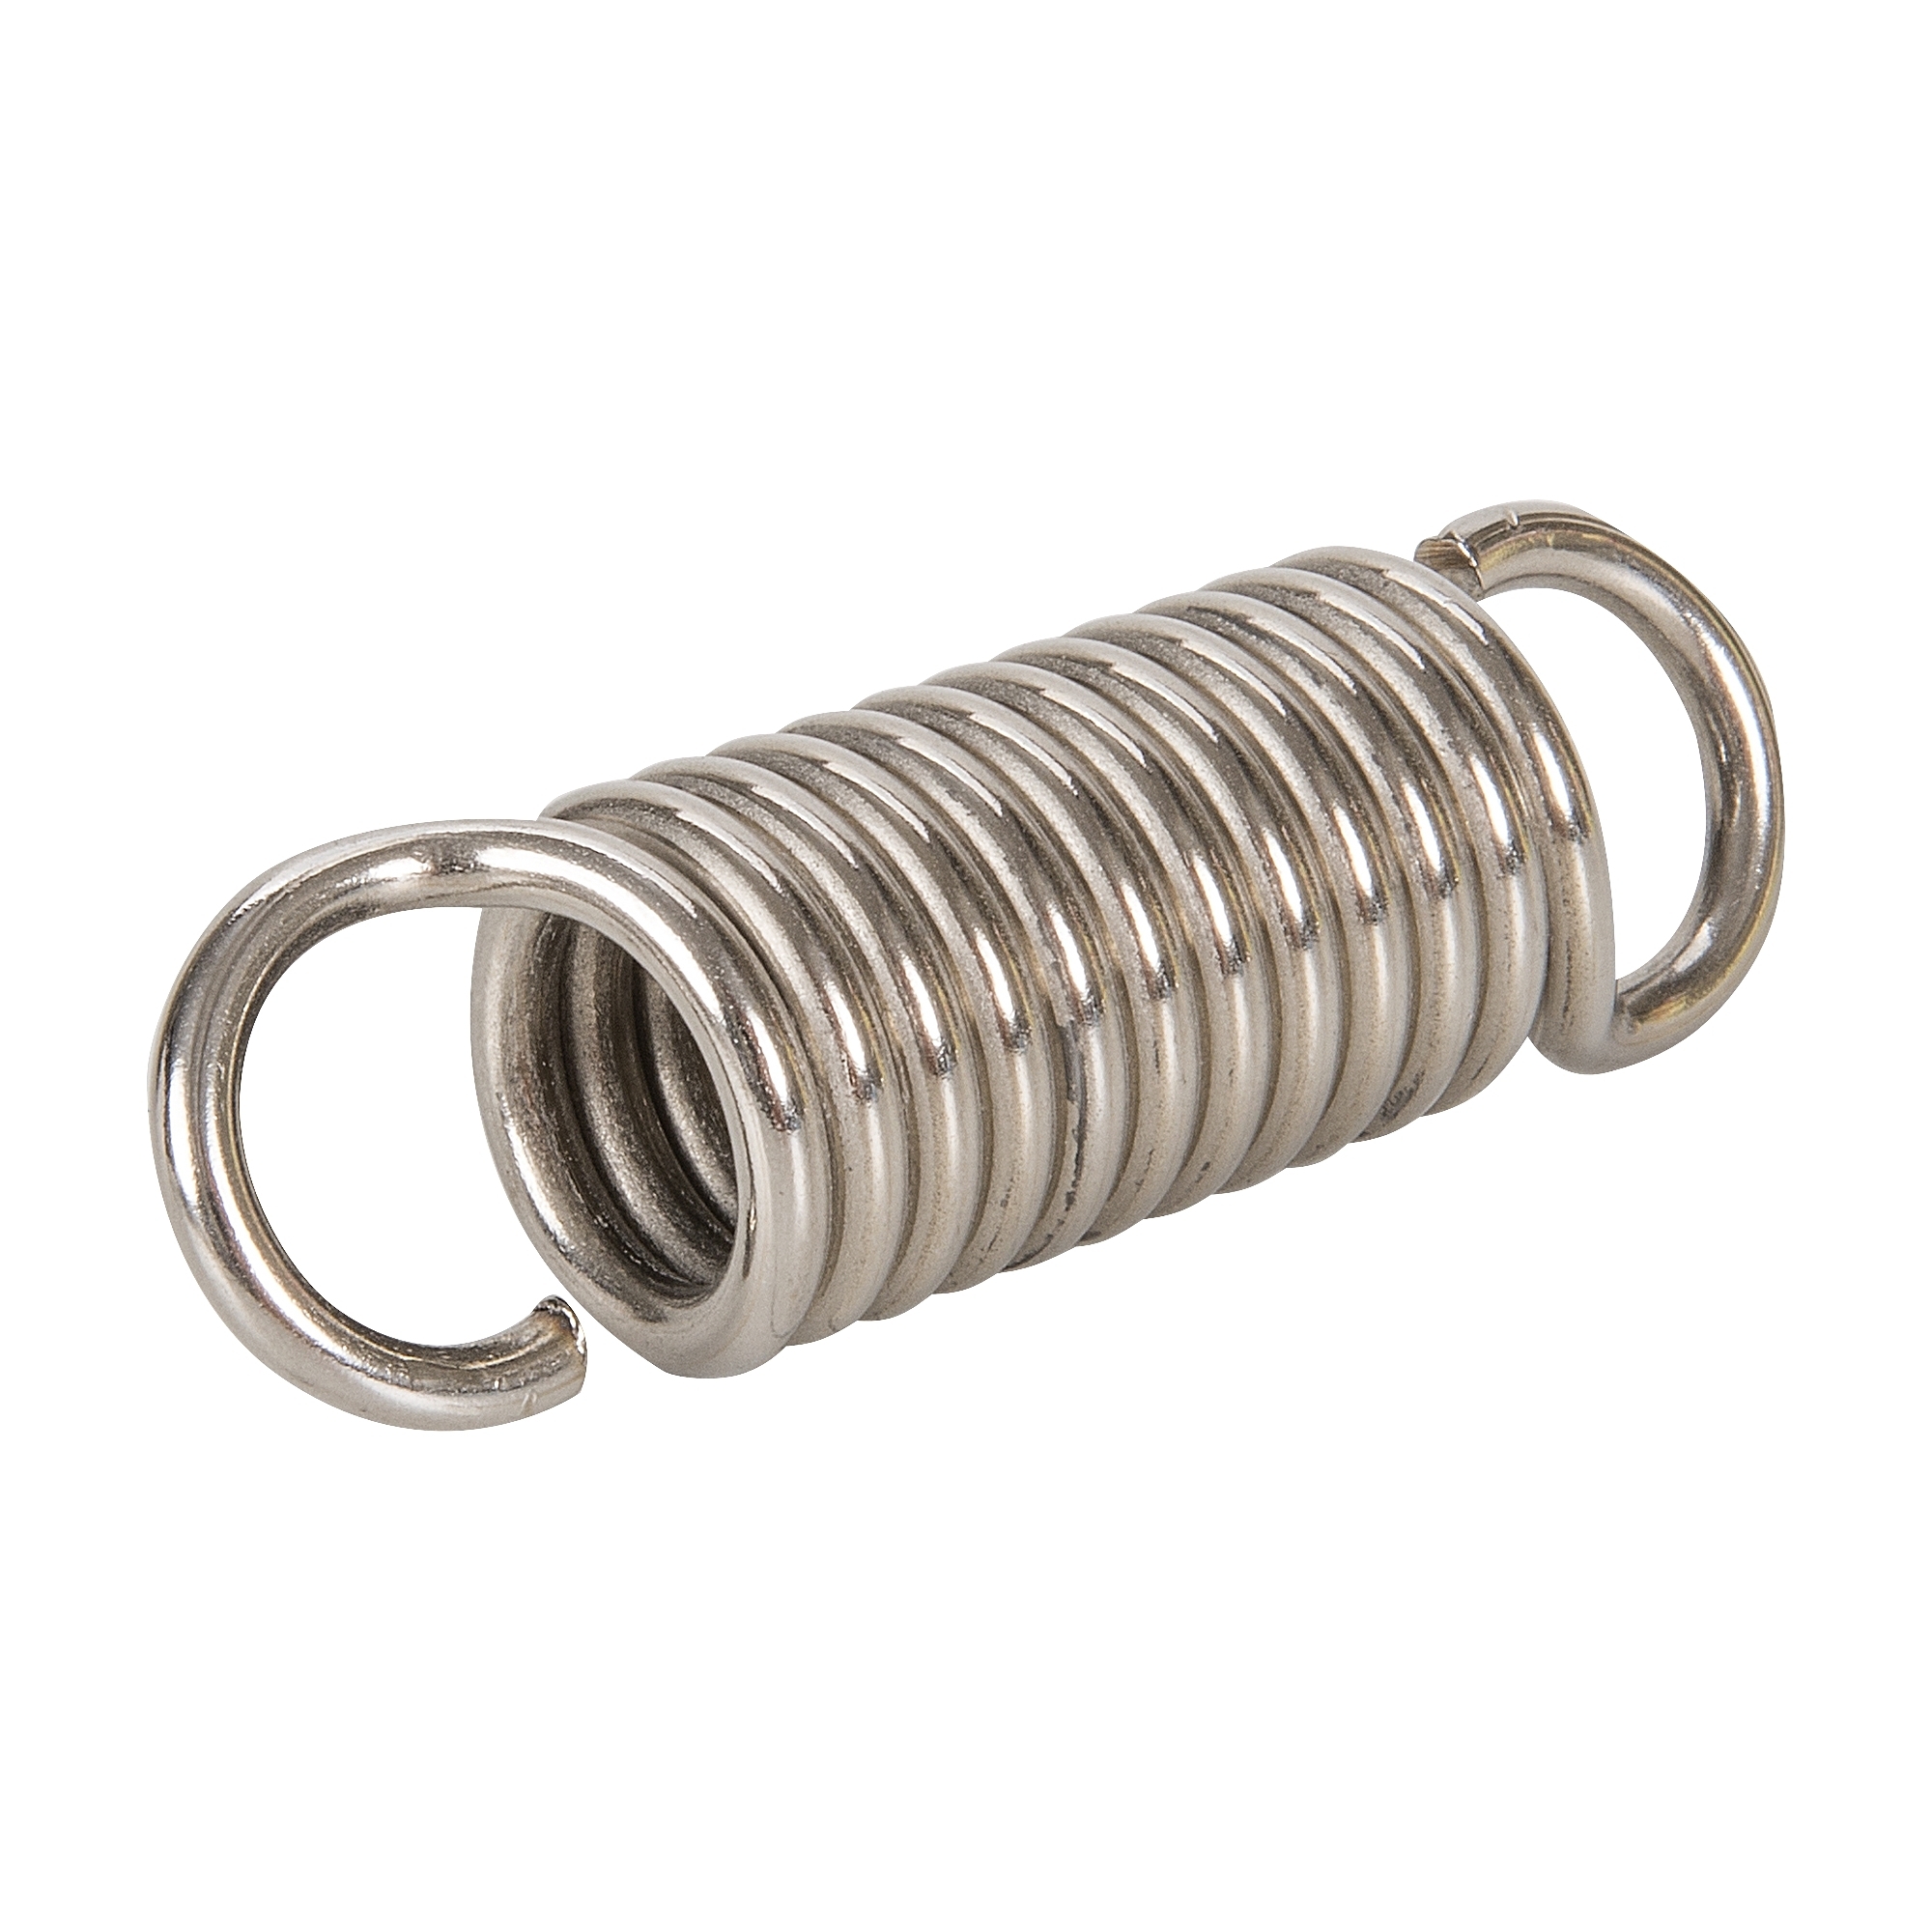 Steute Cable Pull Wire Switch Tension Spring Heavy Duty